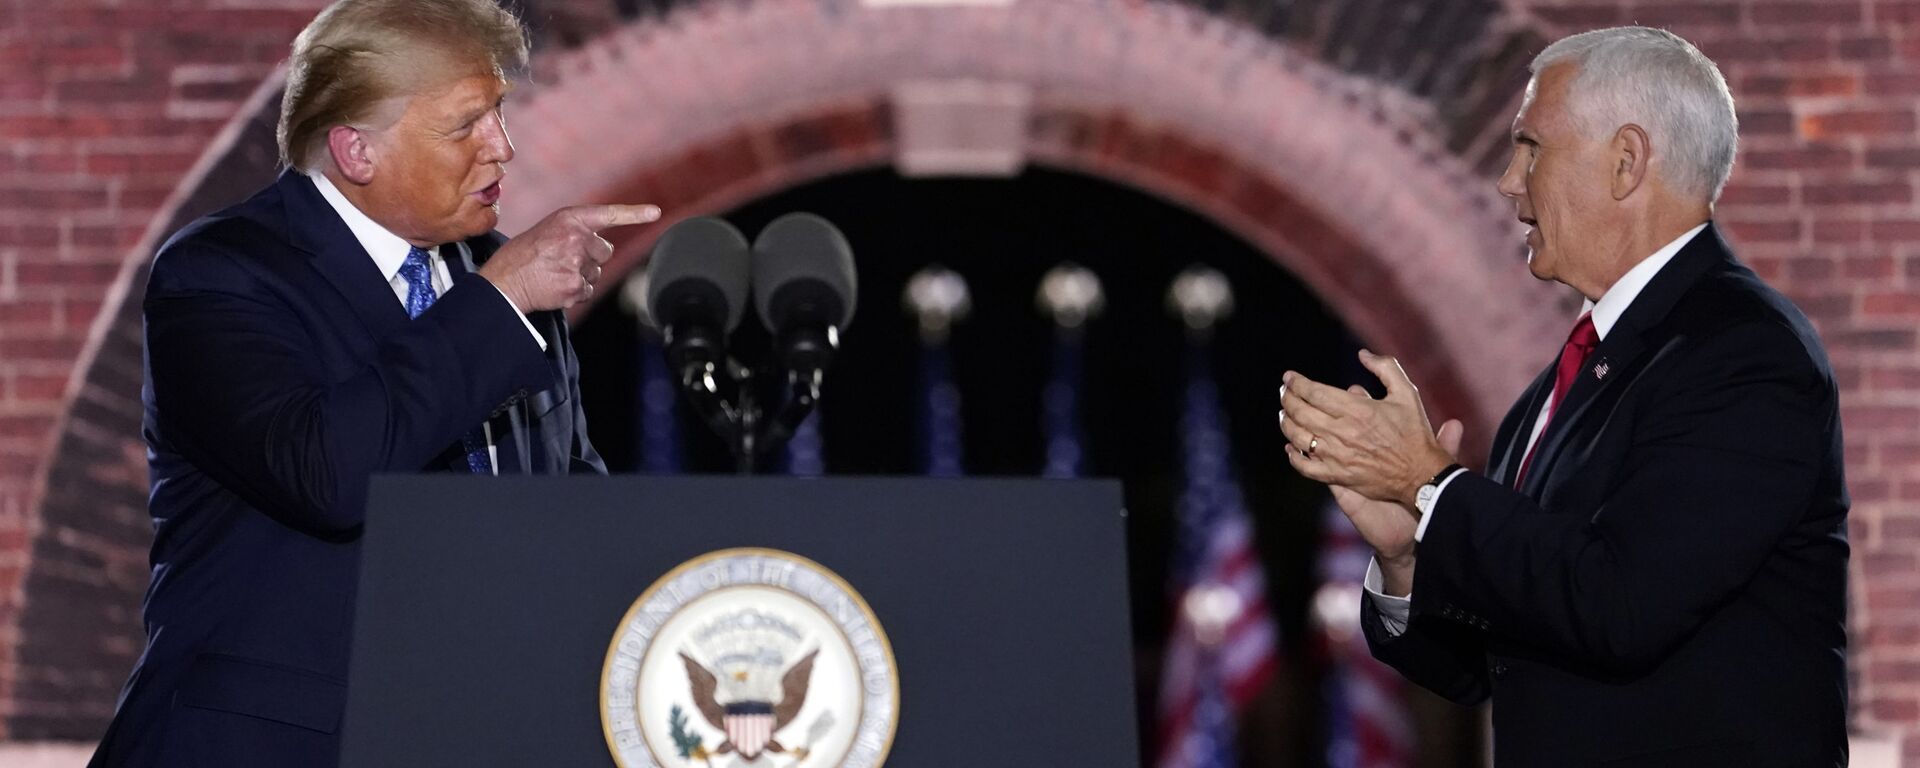 President Donald Trump joins Vice President Mike Pence on stage after Pence spoke on the third day of the Republican National Convention at Fort McHenry National Monument and Historic Shrine in Baltimore, Wednesday, Aug. 26, 2020 - Sputnik International, 1920, 13.01.2021